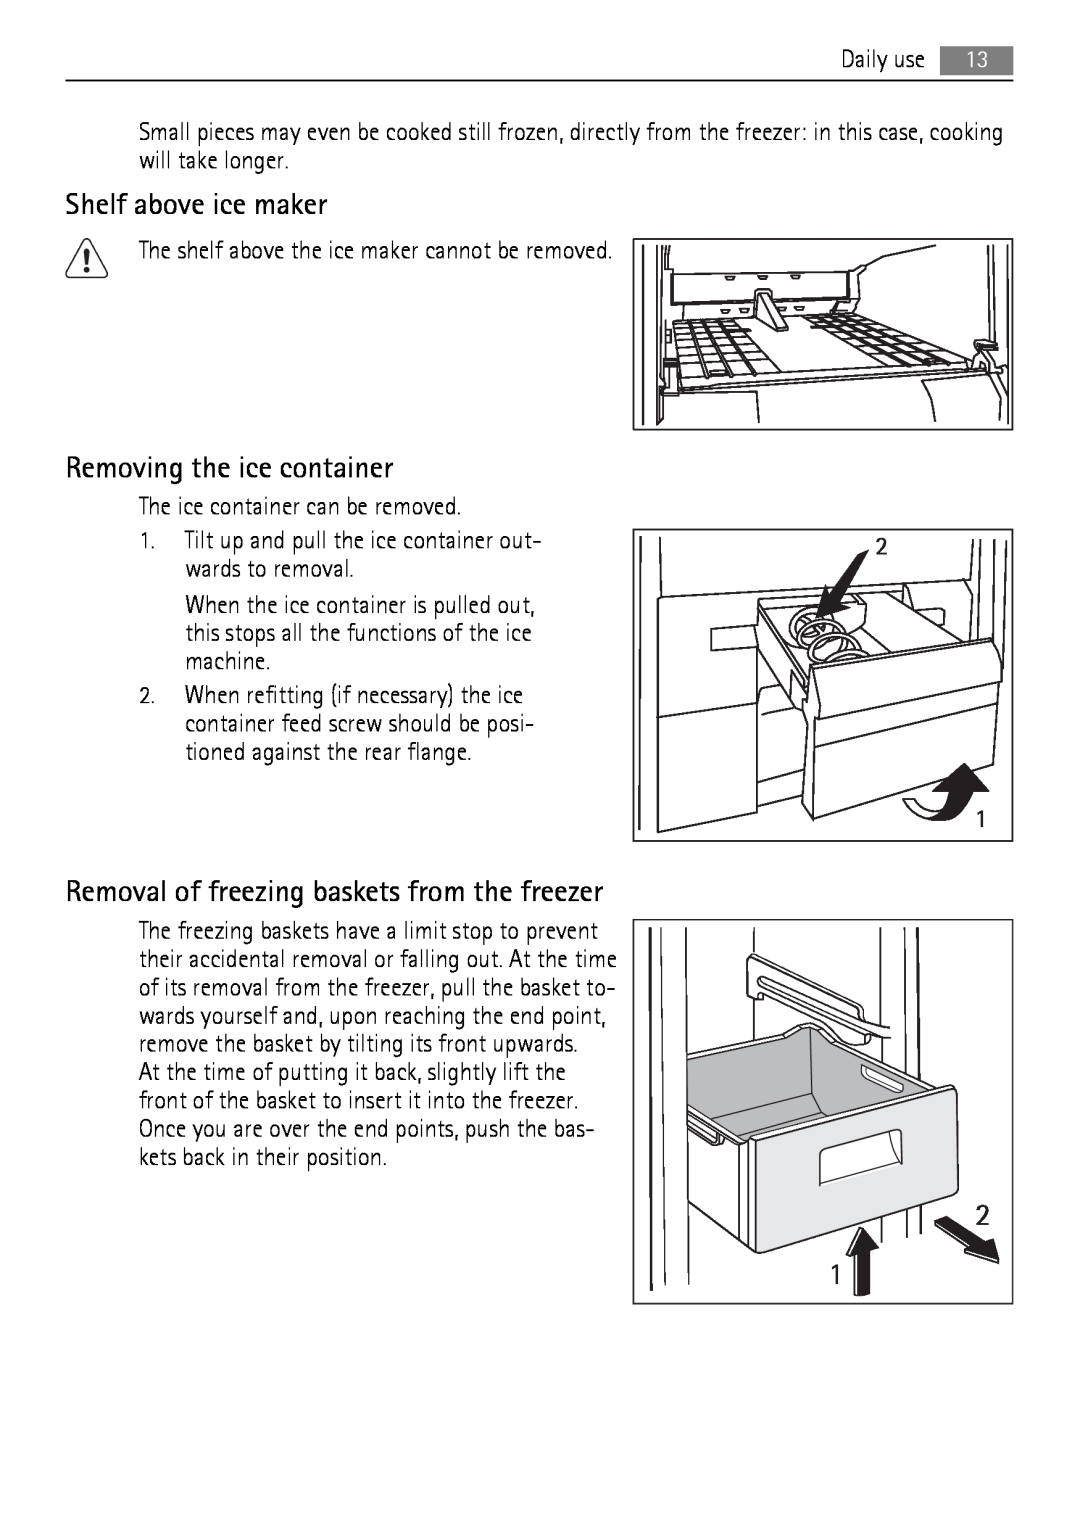 AEG A92860GNB0 user manual Shelf above ice maker, Removing the ice container, Removal of freezing baskets from the freezer 